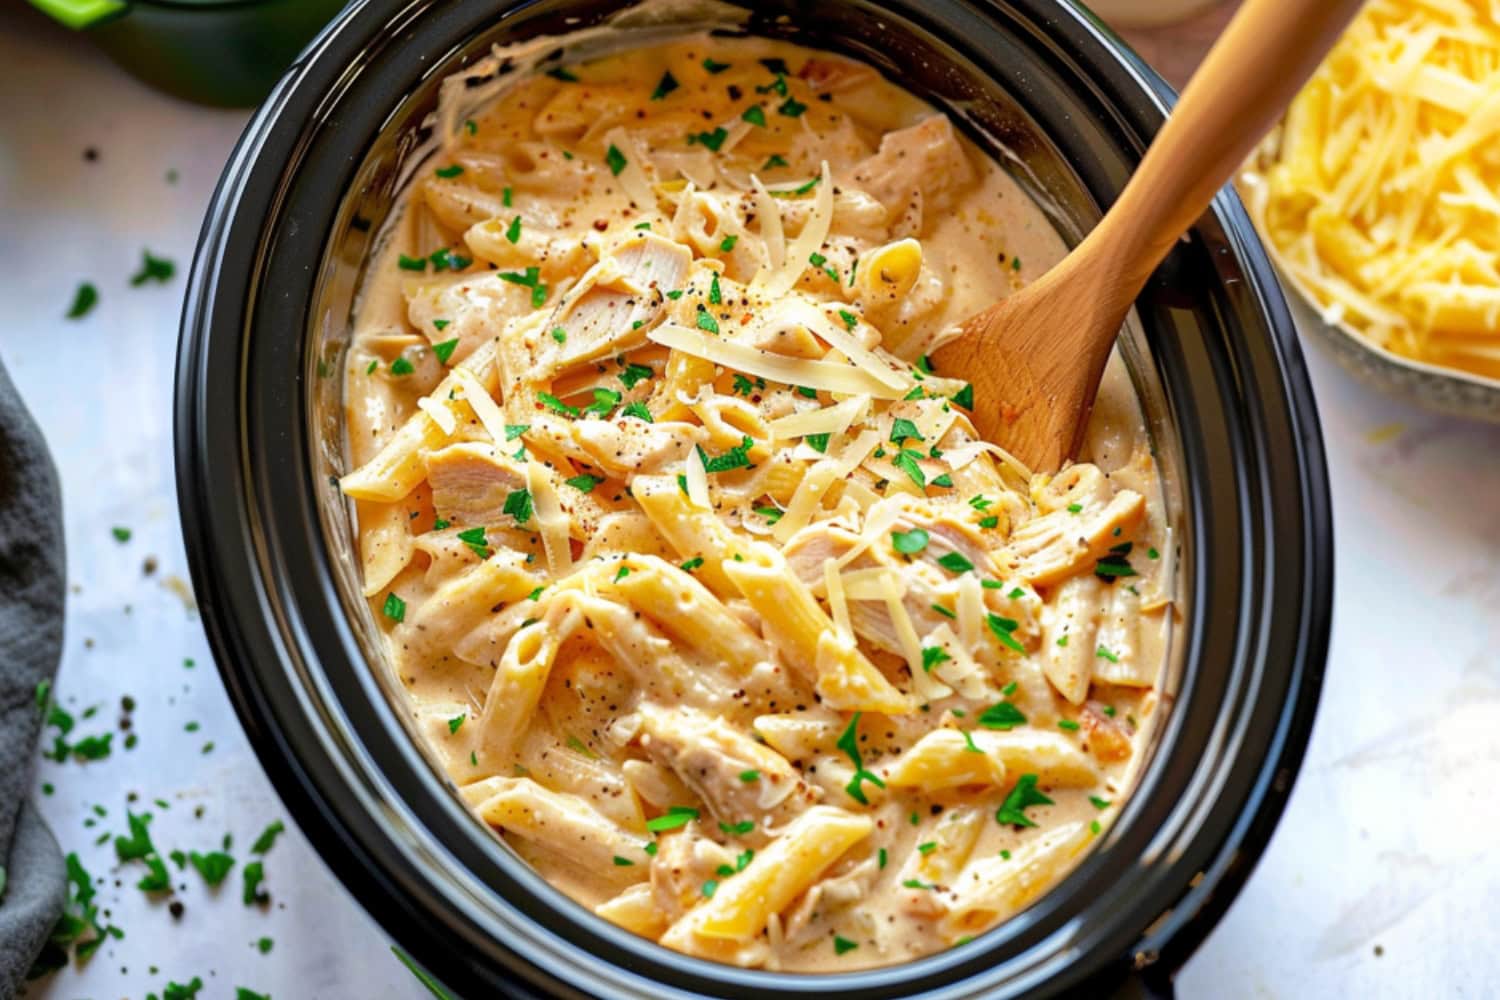 Penne pasta in creamy and buttery olive garden sauce, cooked in a slow cooker with shredded chicken and parmesan cheese, tossed with a wooden ladle.